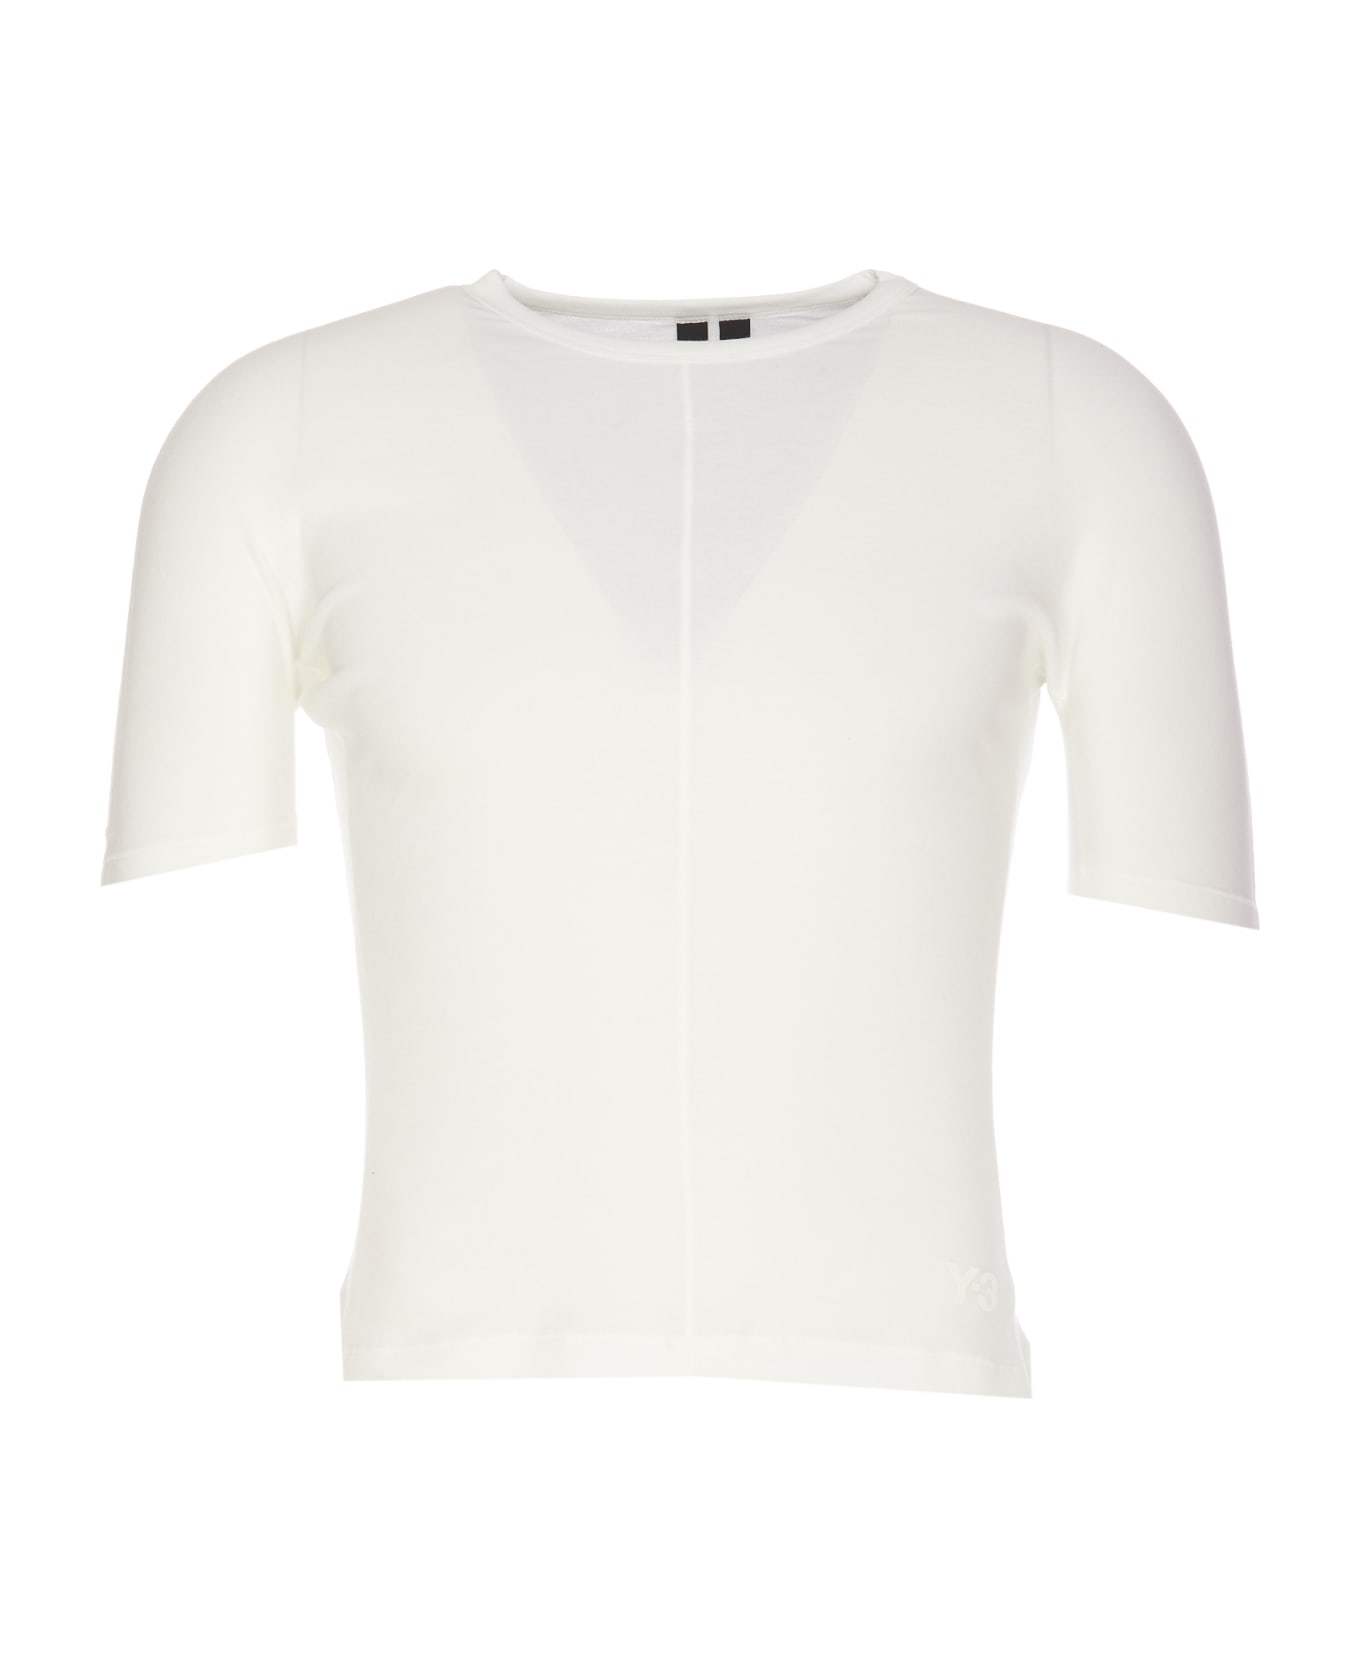 Y-3 Logo Fitted T-shirt - White